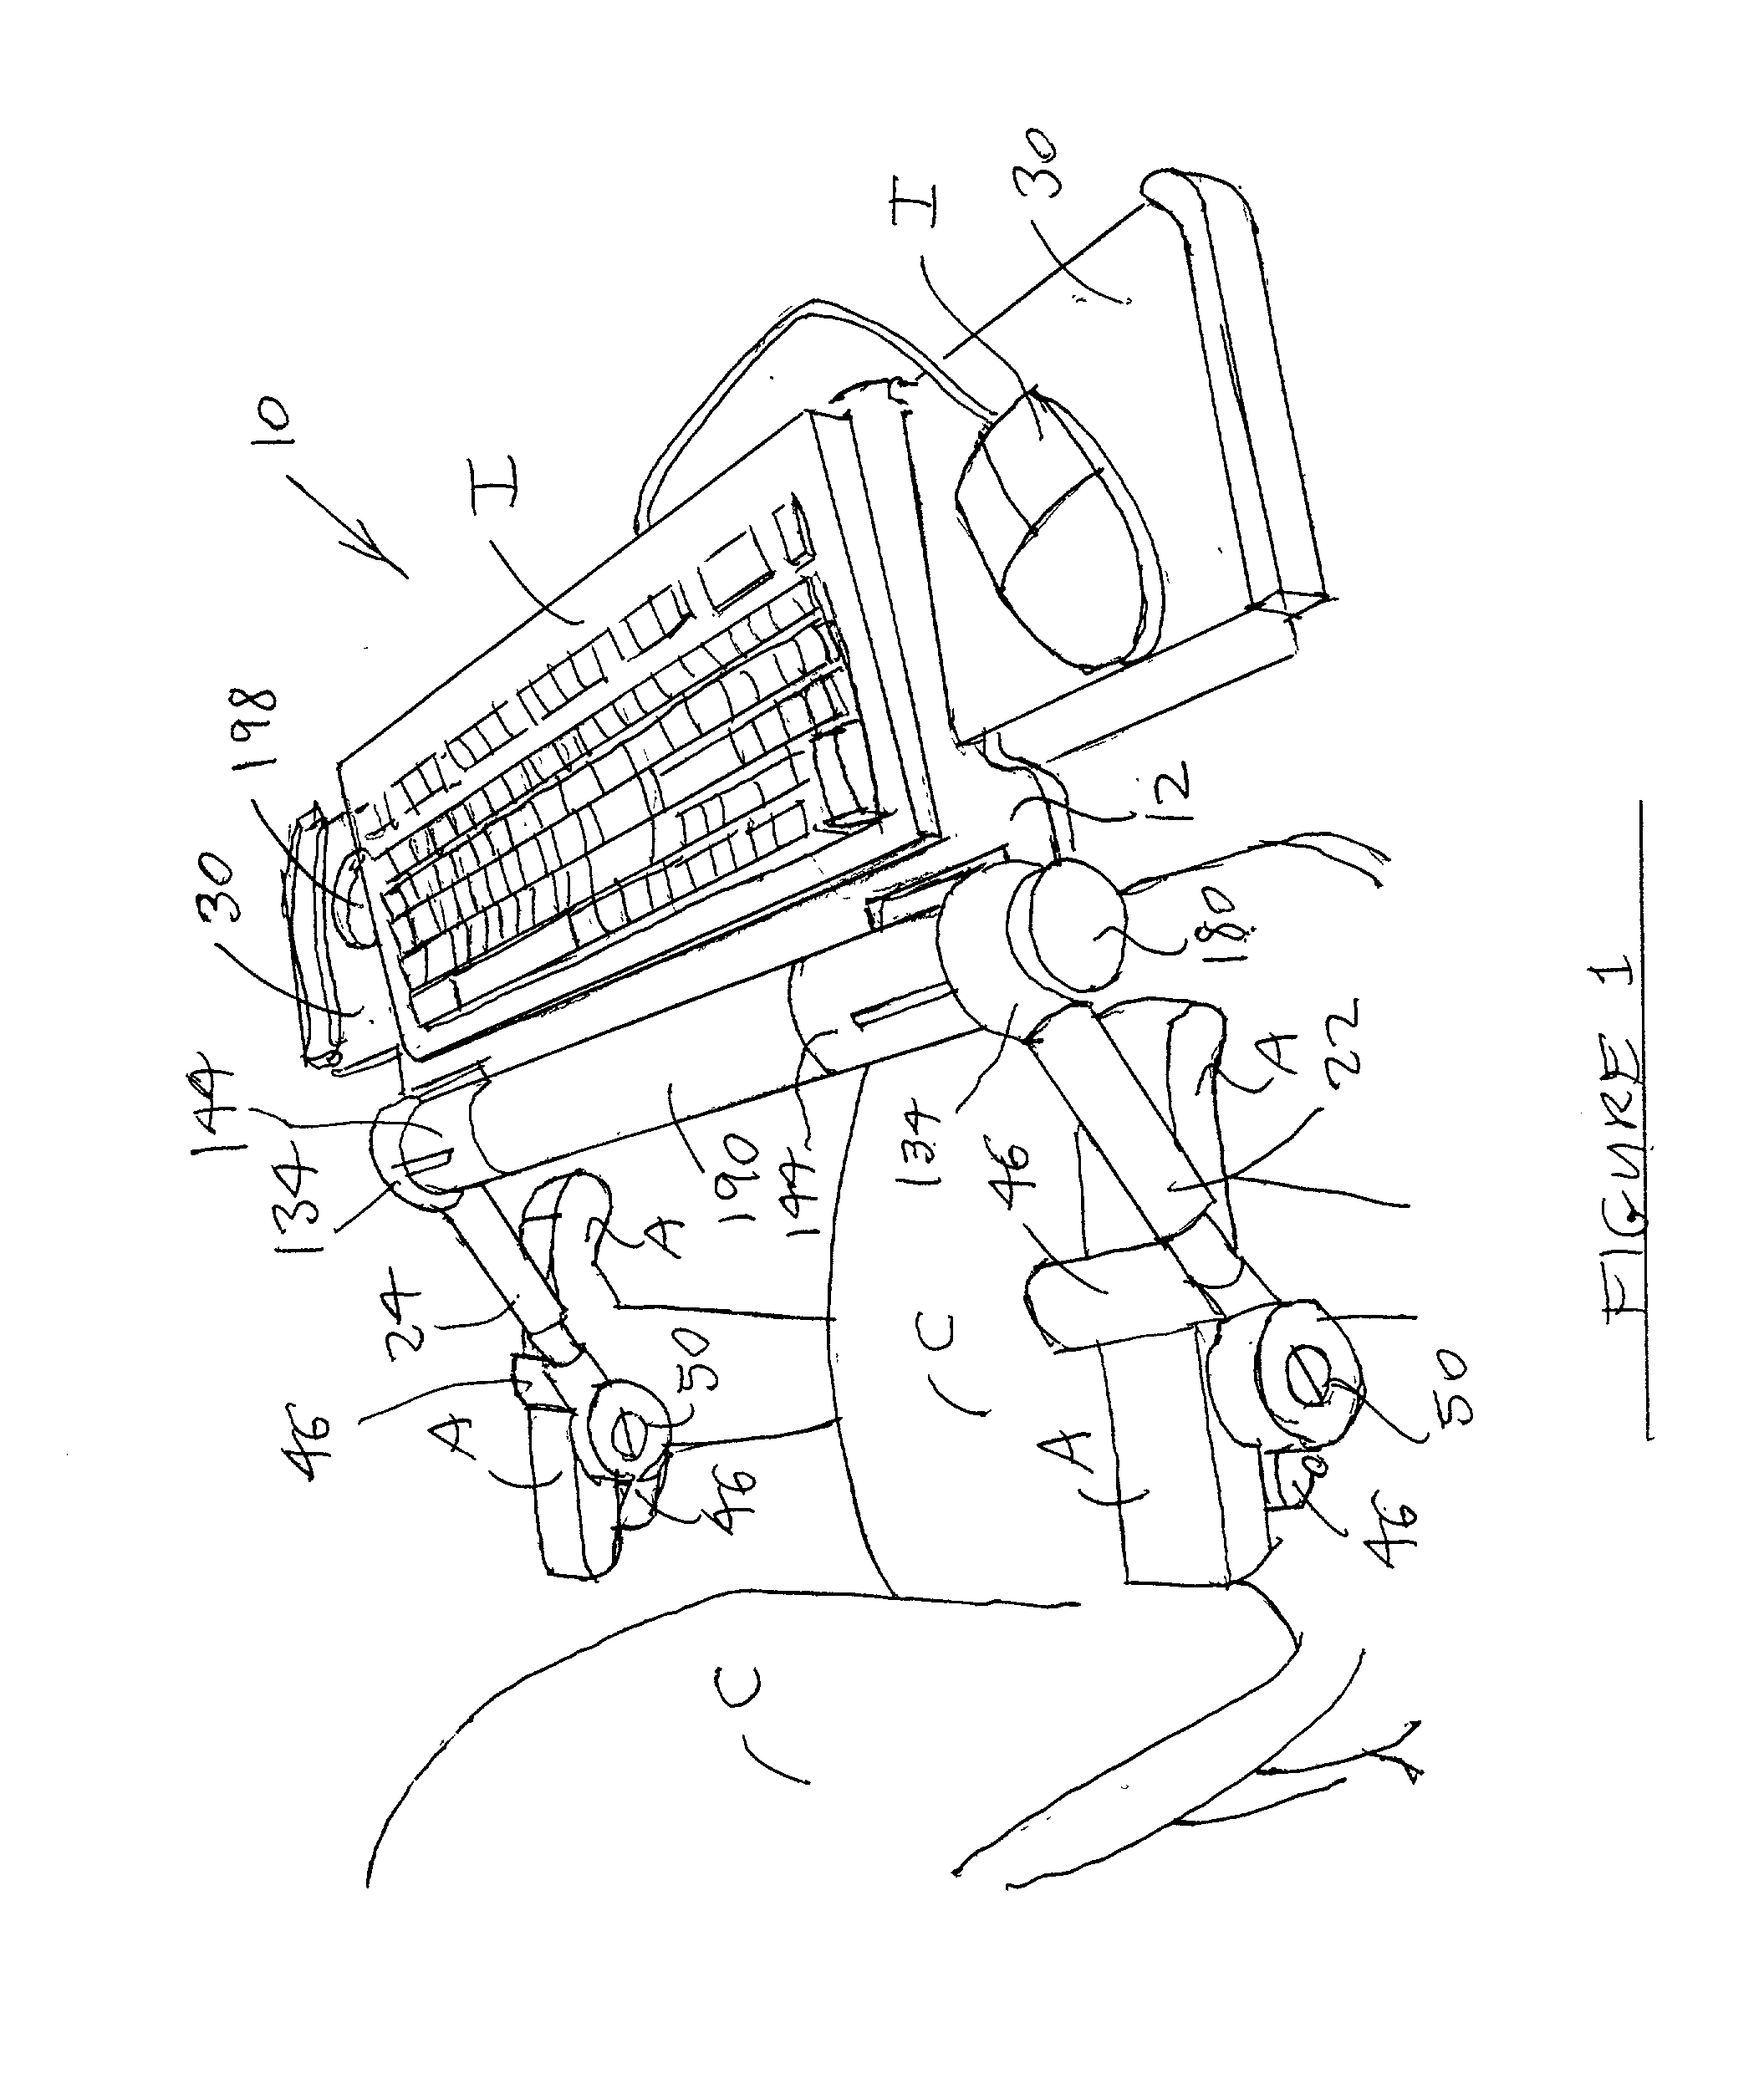 Arm chair mounted keyboard support apparatus